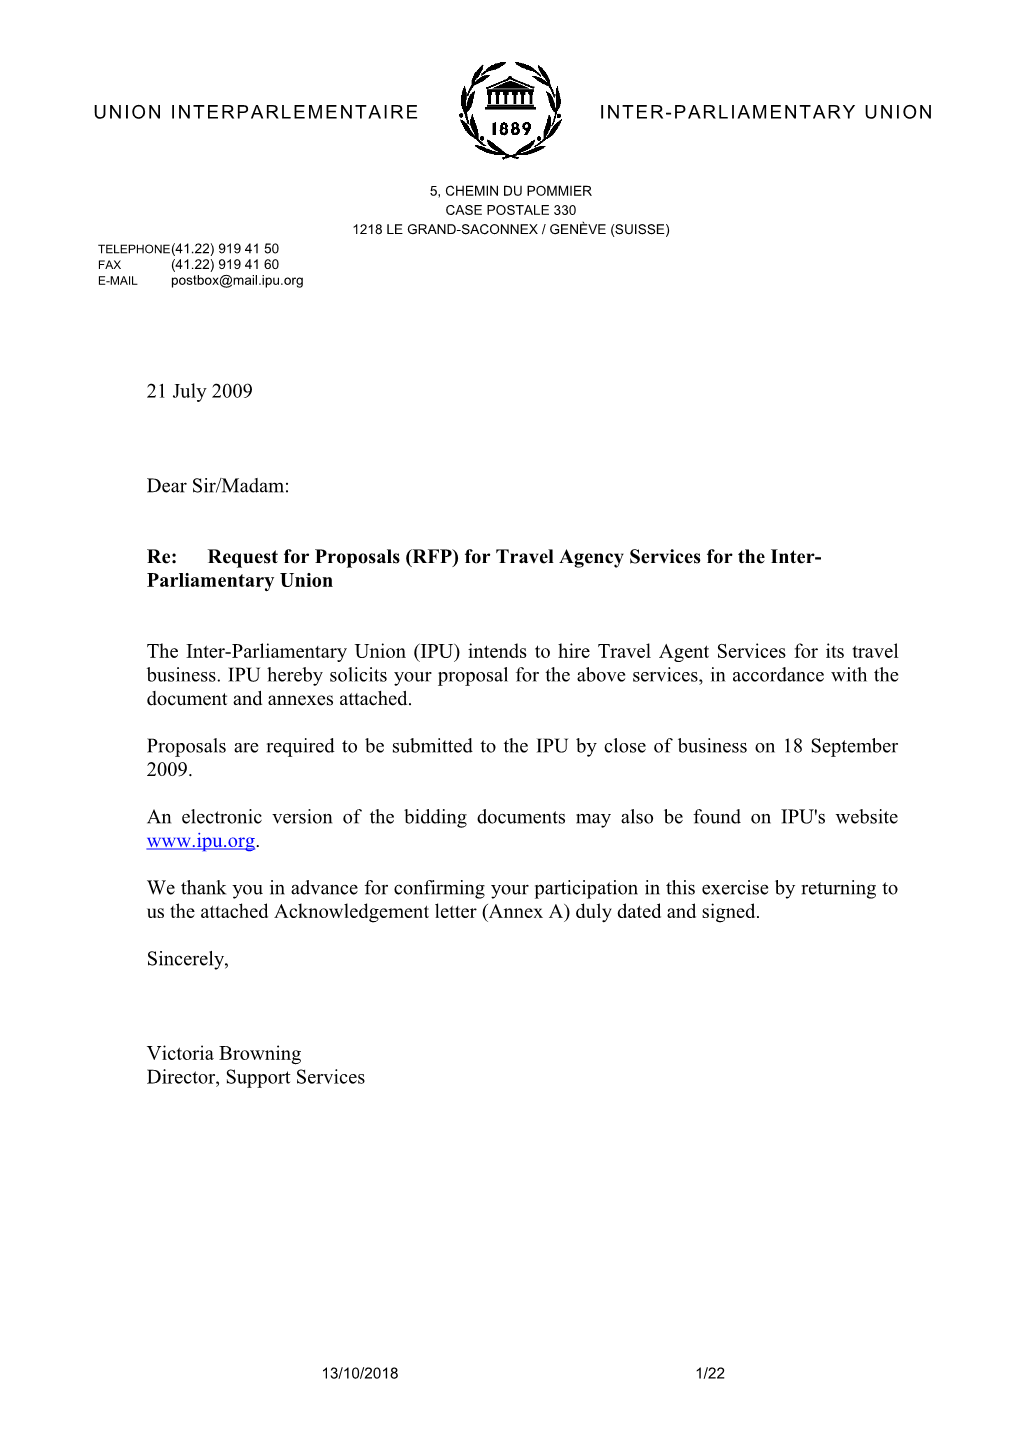 Re:Request for Proposals (RFP) for Travel Agency Services for the Inter-Parliamentary Union